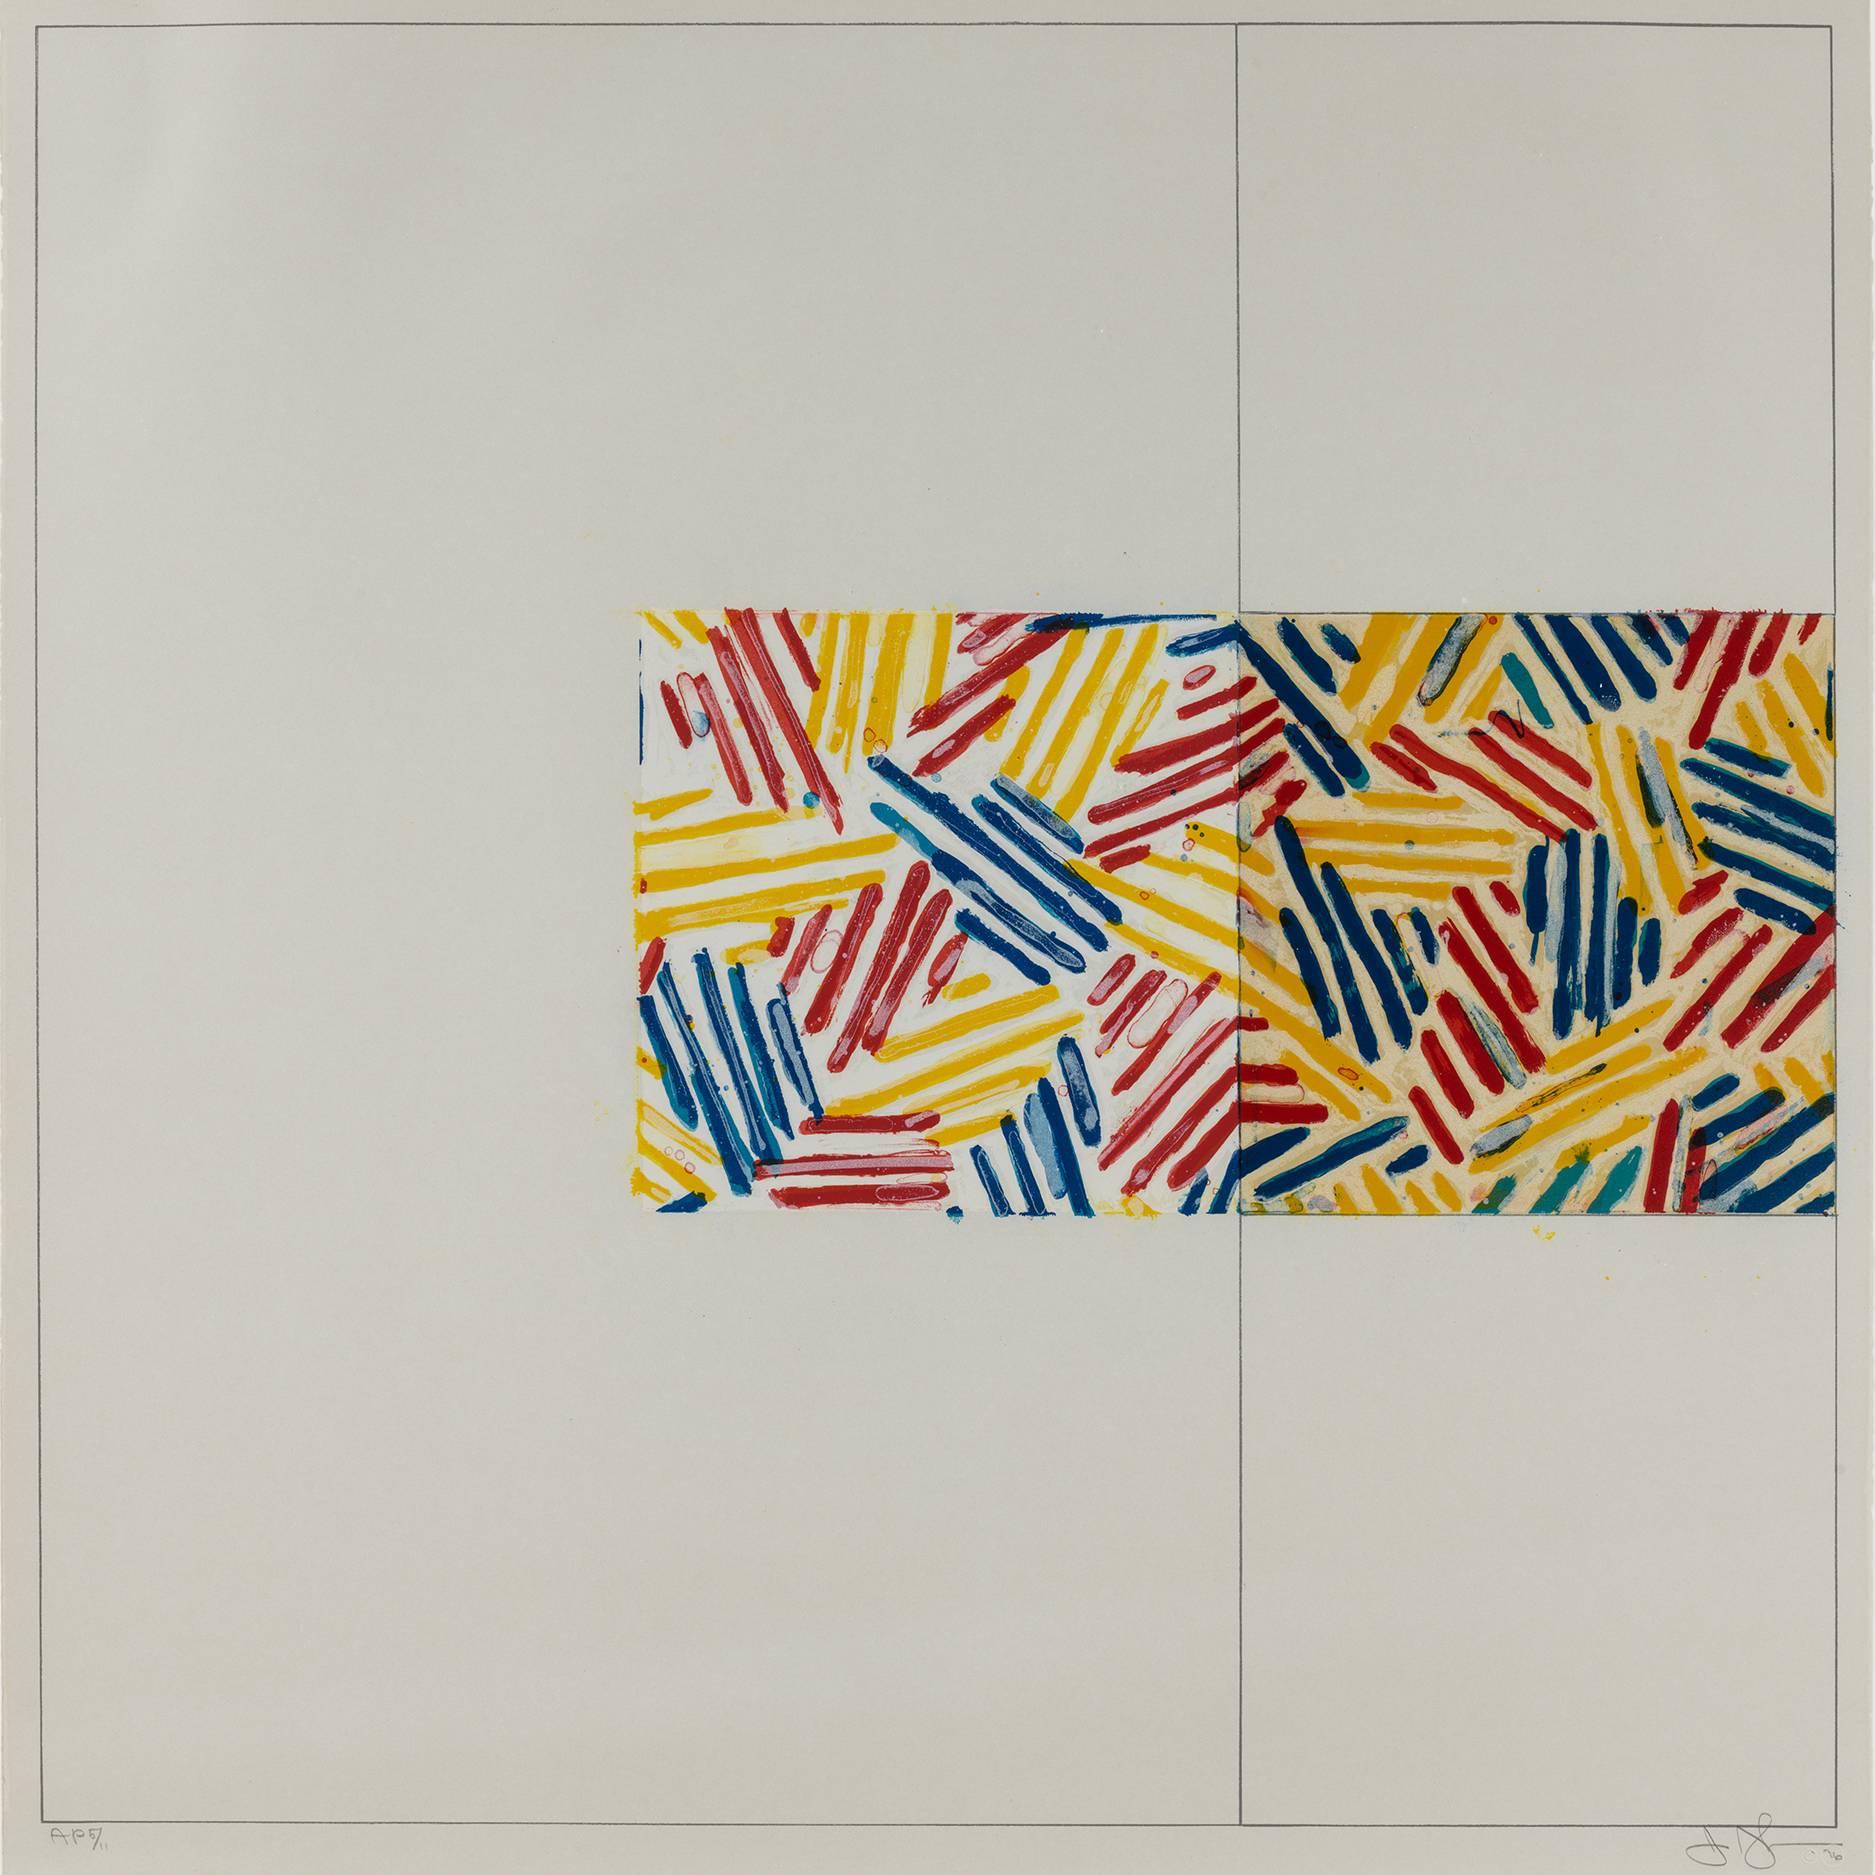 6 Lithographs (after Untitled 1975) - American Modern Print by Jasper Johns